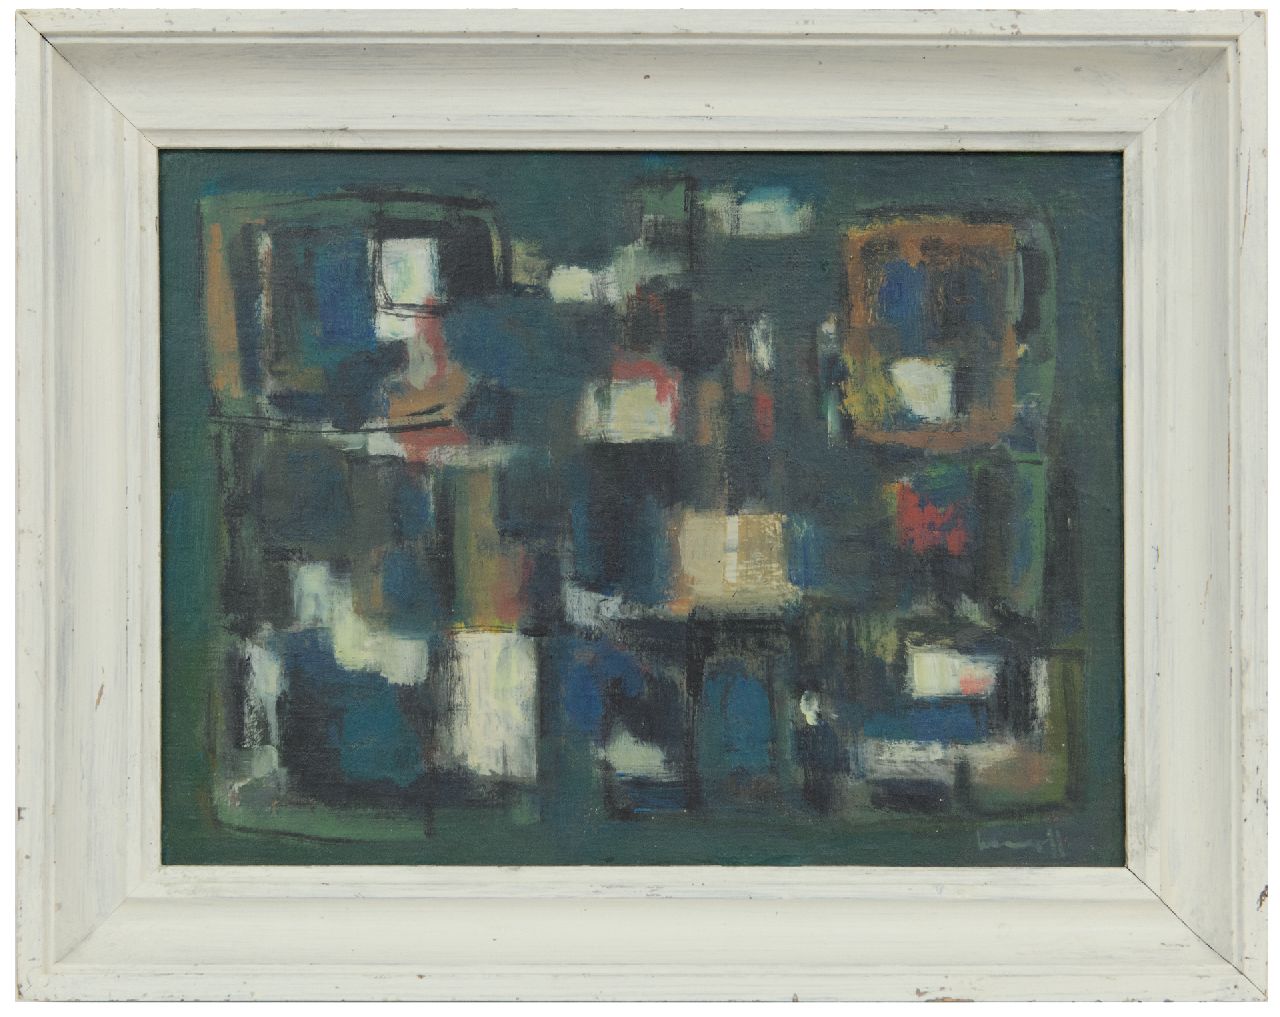 Kropff J.  | Johan 'Joop' Kropff | Paintings offered for sale | Composition, oil on canvas 30.7 x 40.3 cm, signed l.r.